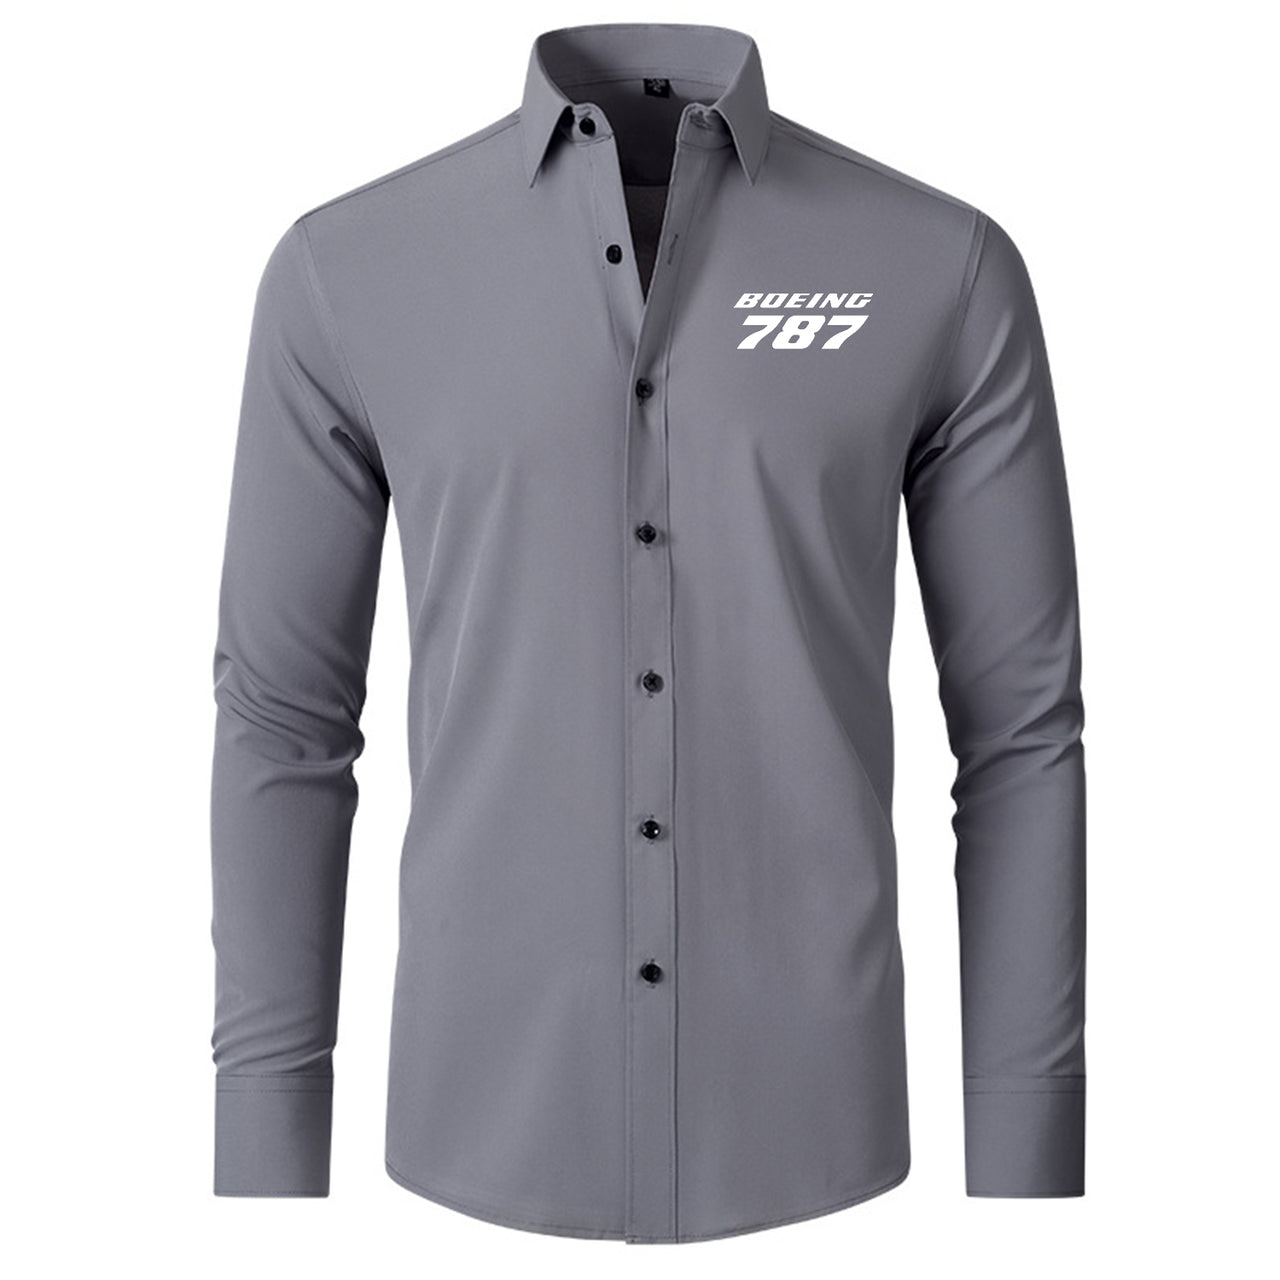 Boeing 787 & Text Designed Long Sleeve Shirts